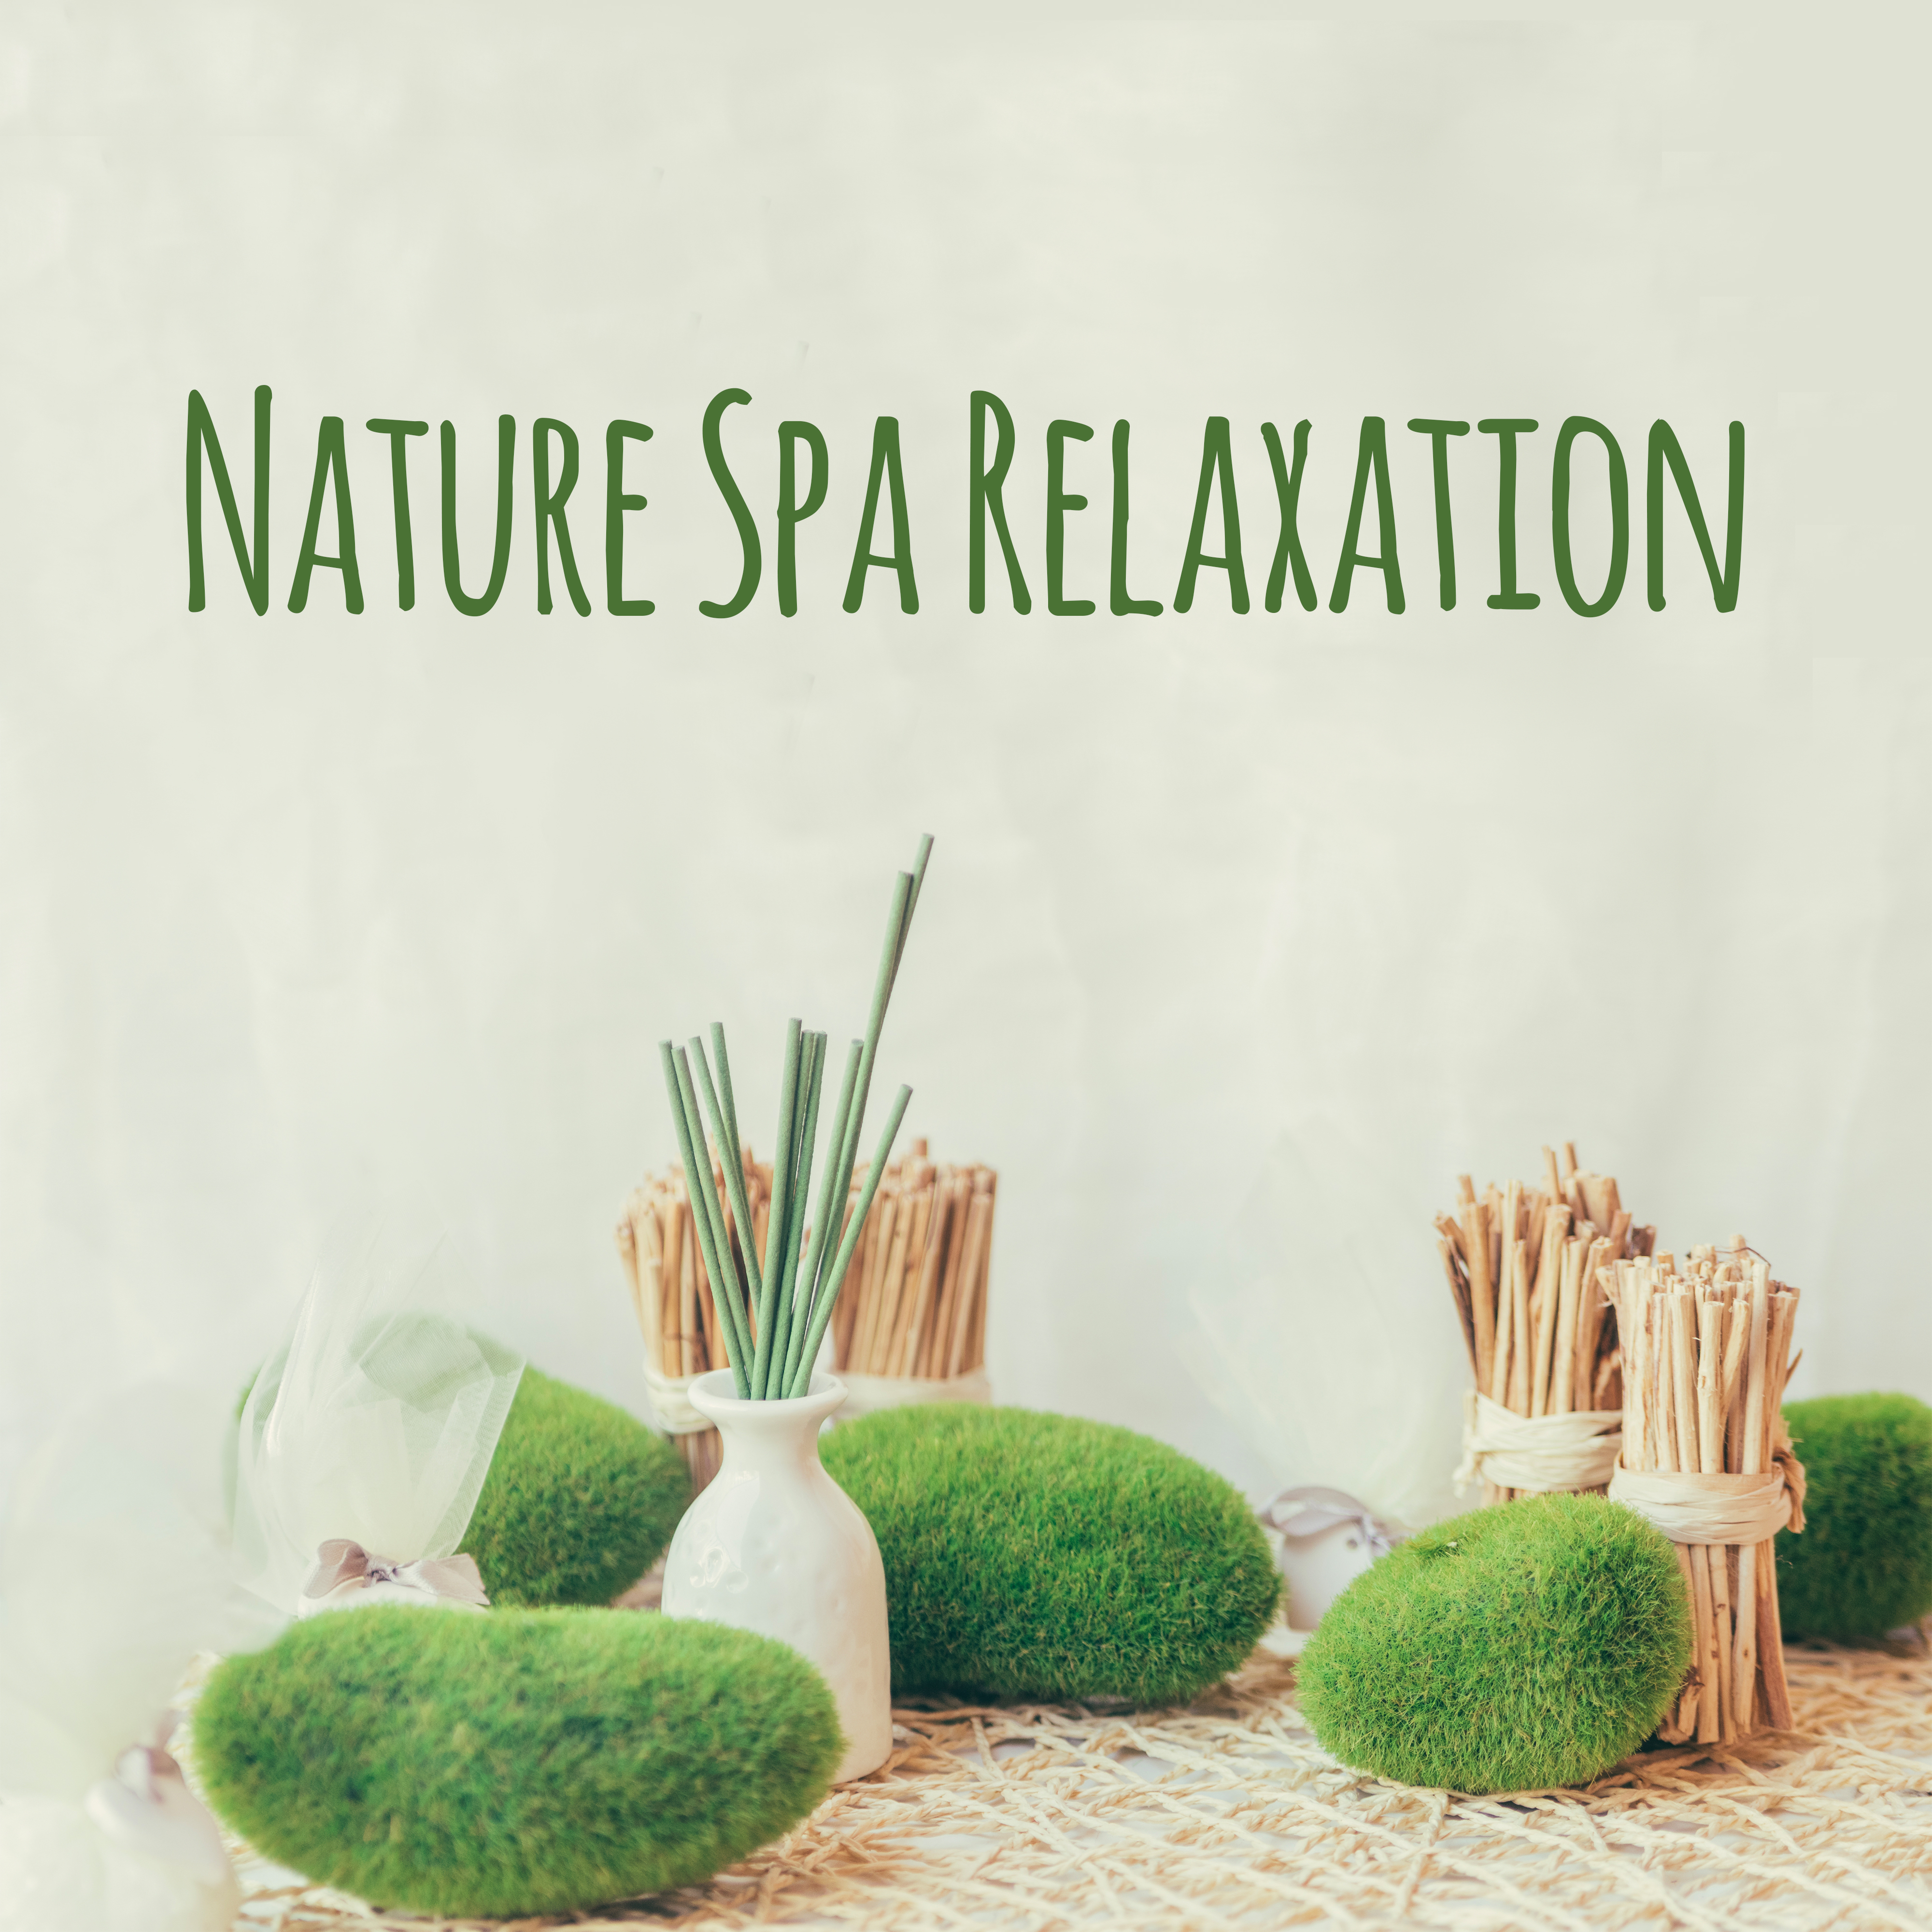 Nature Spa Relaxation